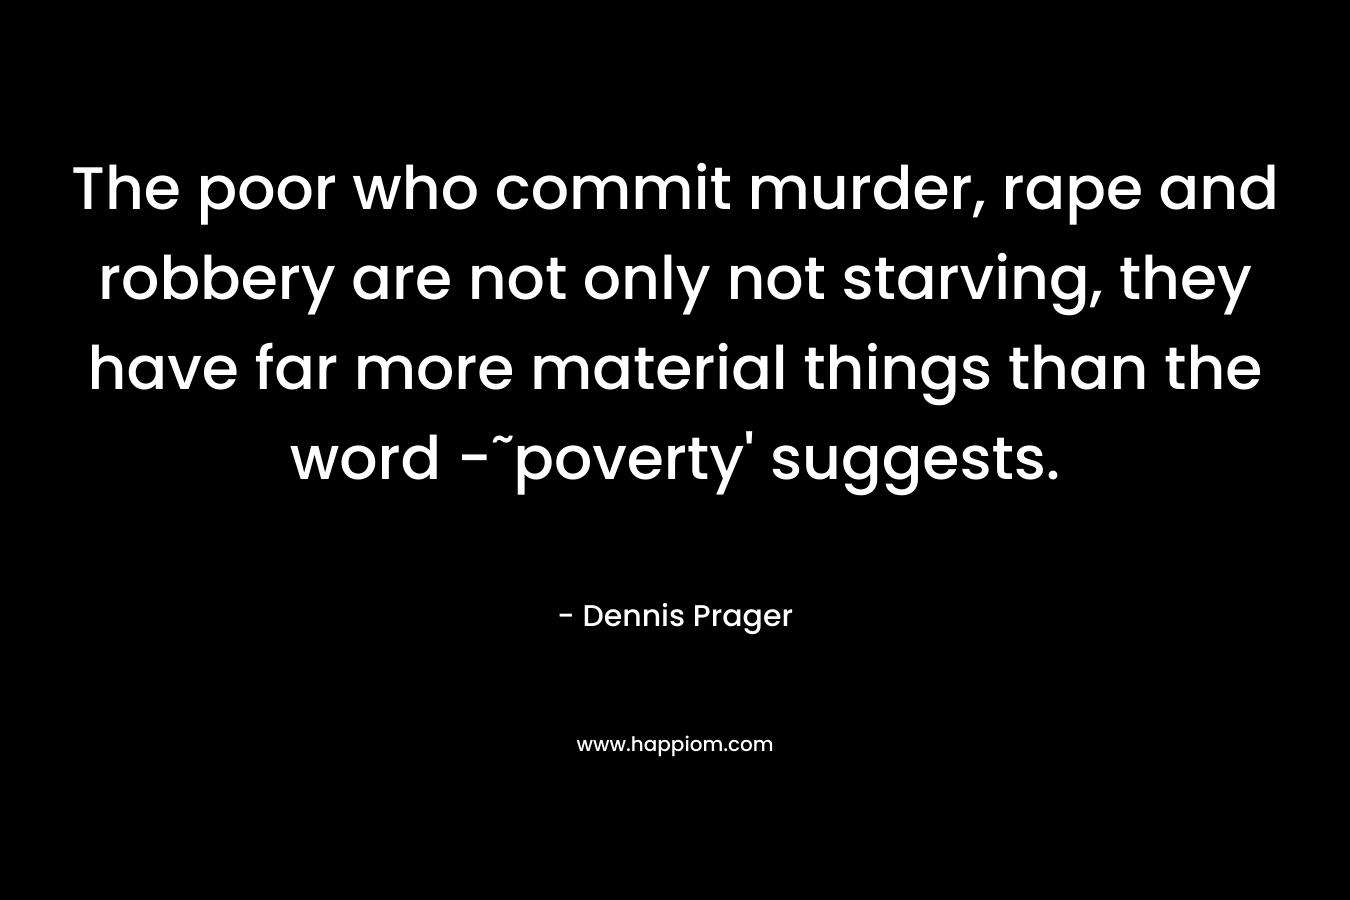 The poor who commit murder, rape and robbery are not only not starving, they have far more material things than the word -˜poverty’ suggests. – Dennis Prager